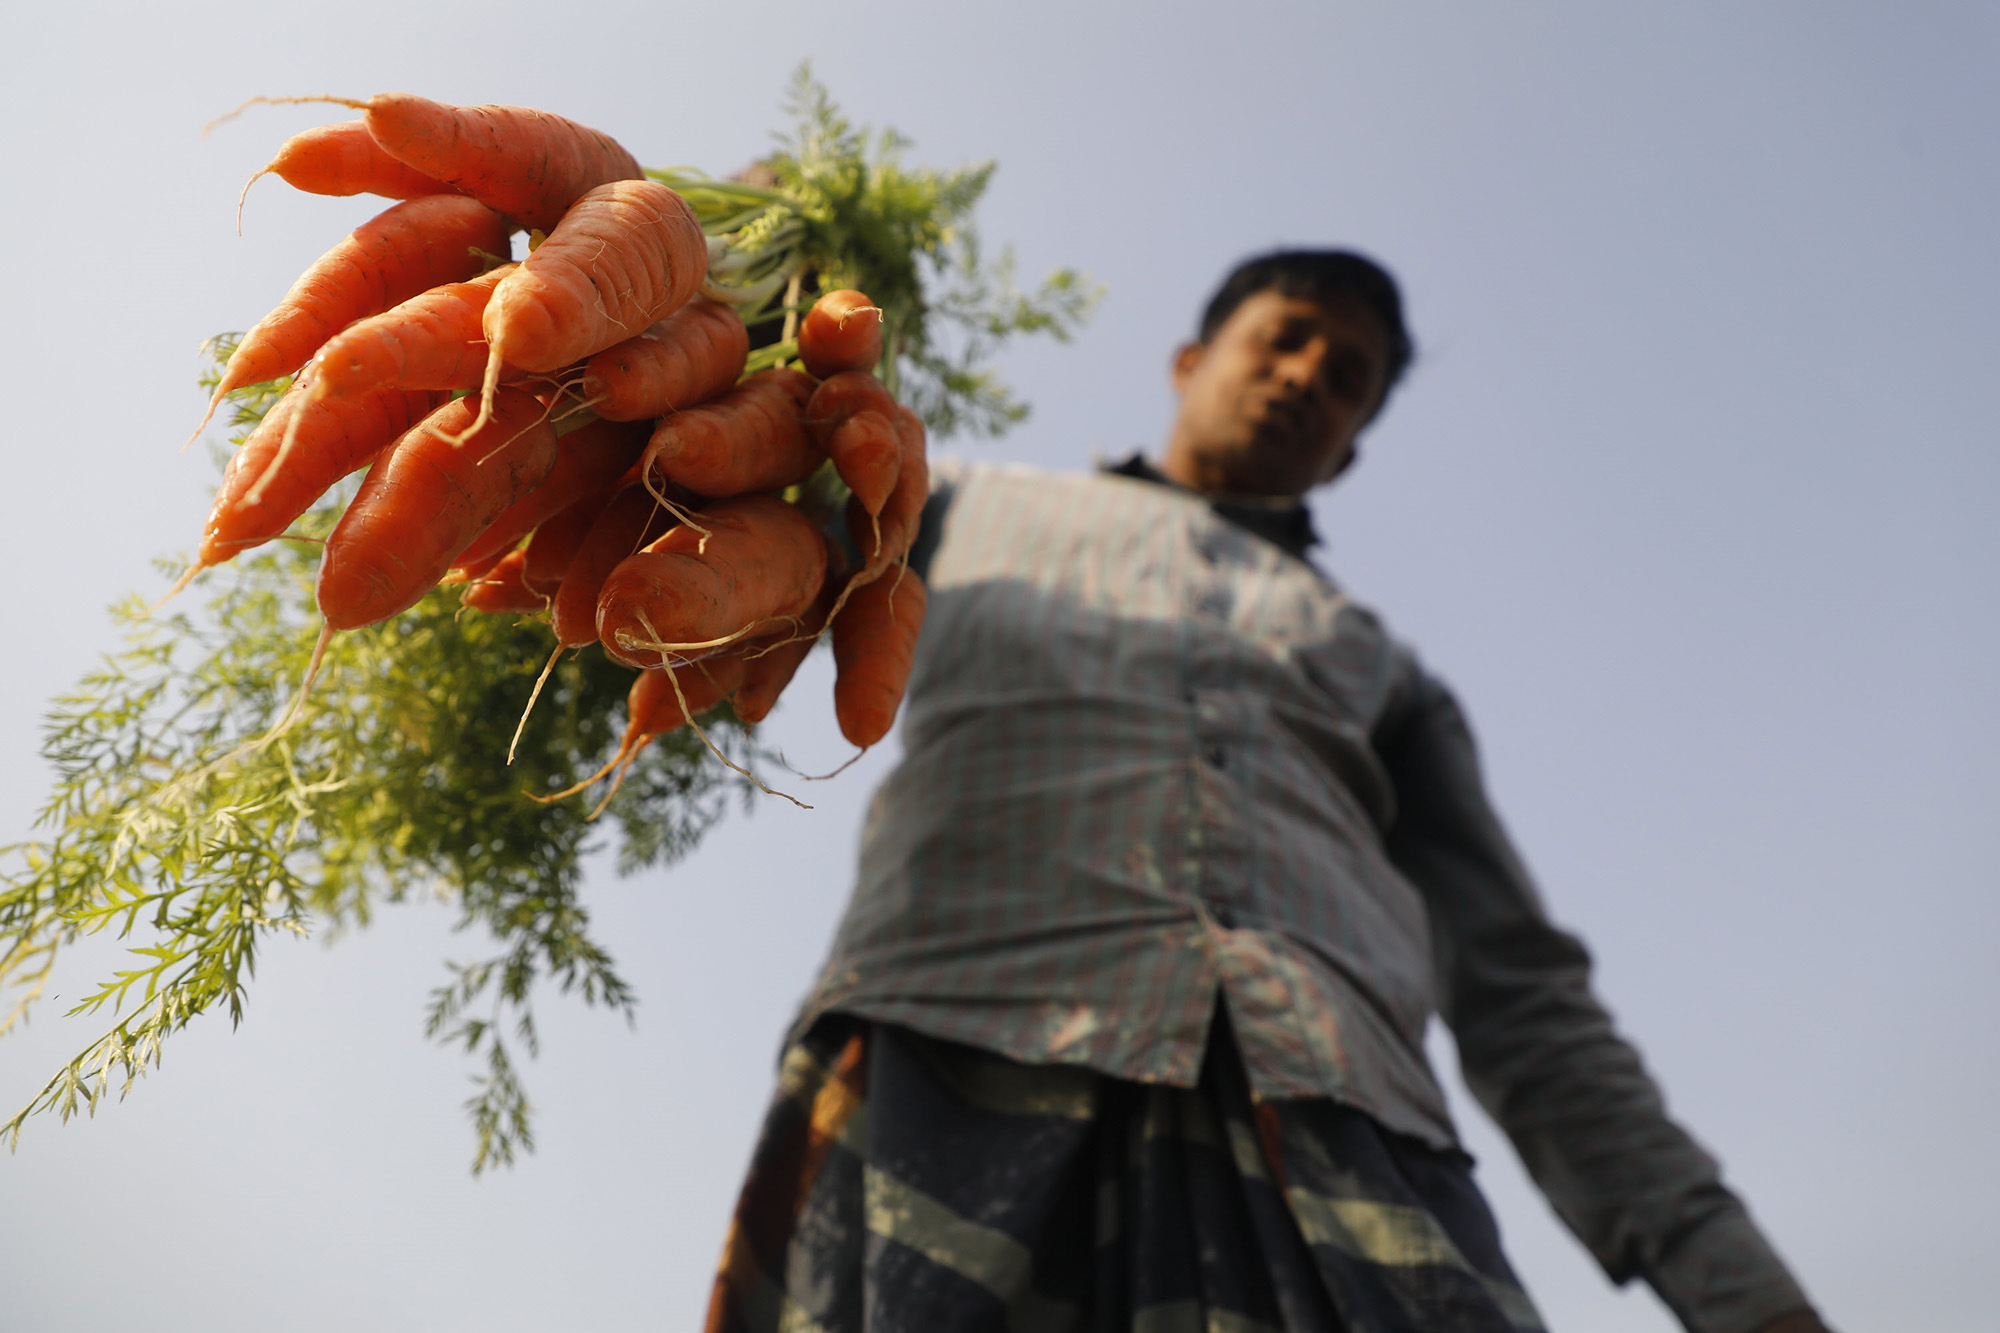 A man holding a bunch of carrots.